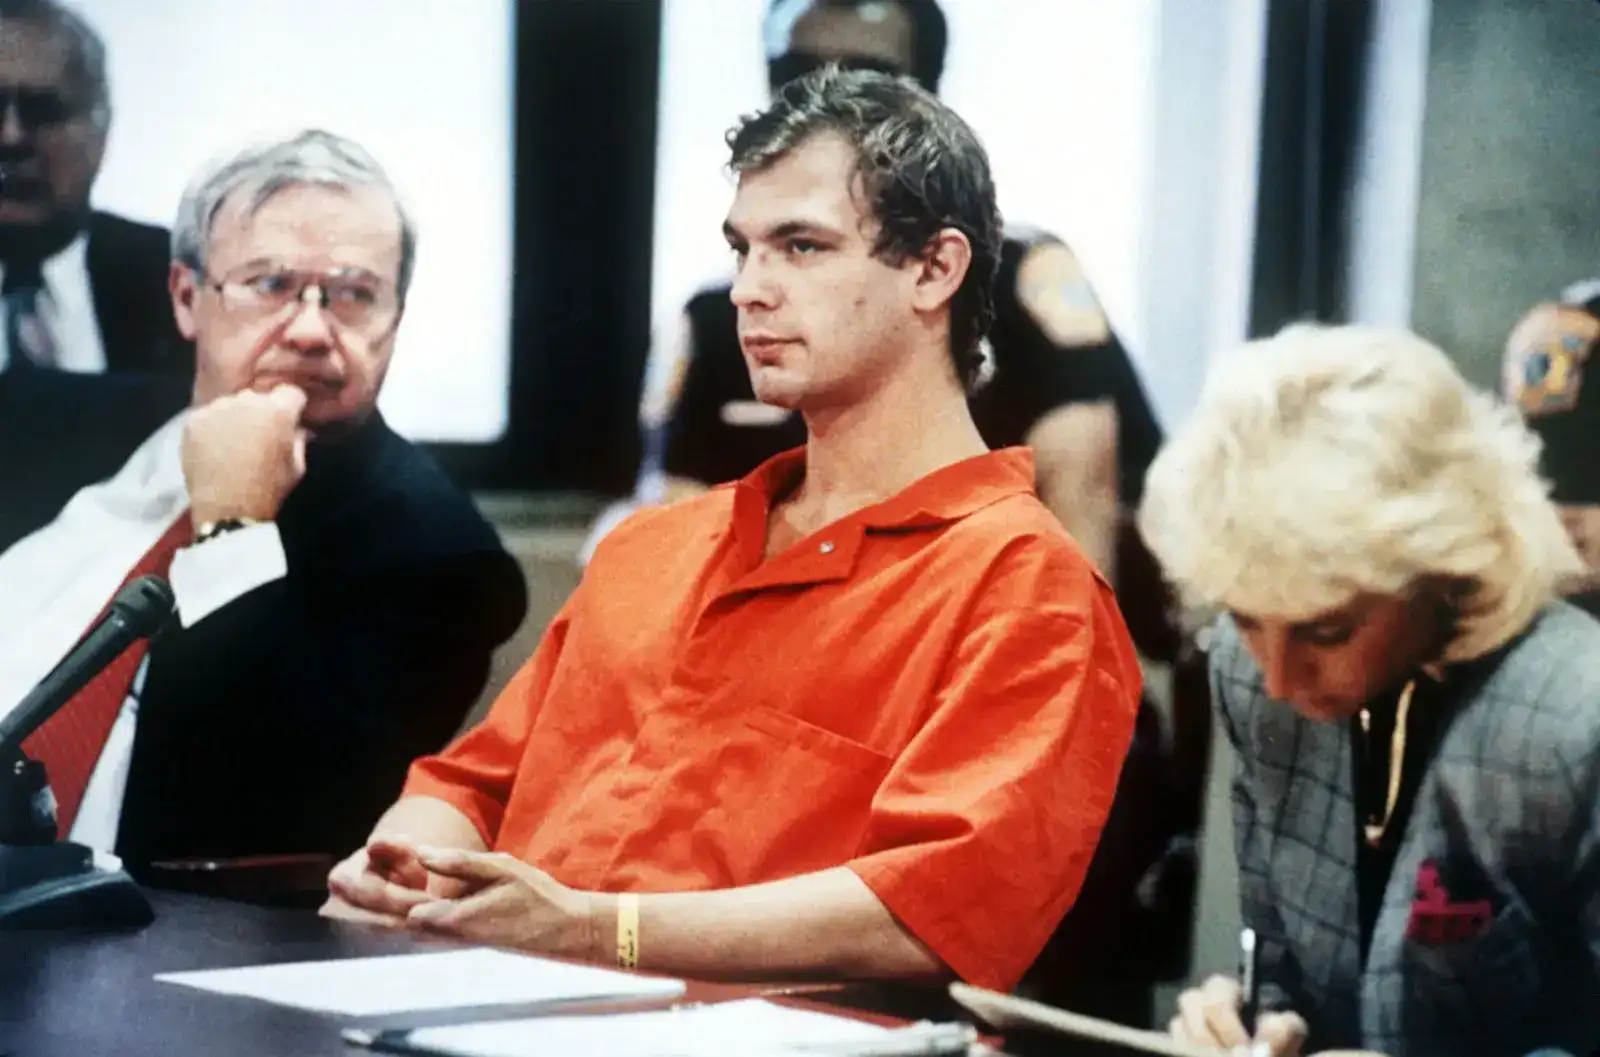 Everything You Need to Know About DAHMER - Monster: The Jeffrey Dahmer Story!